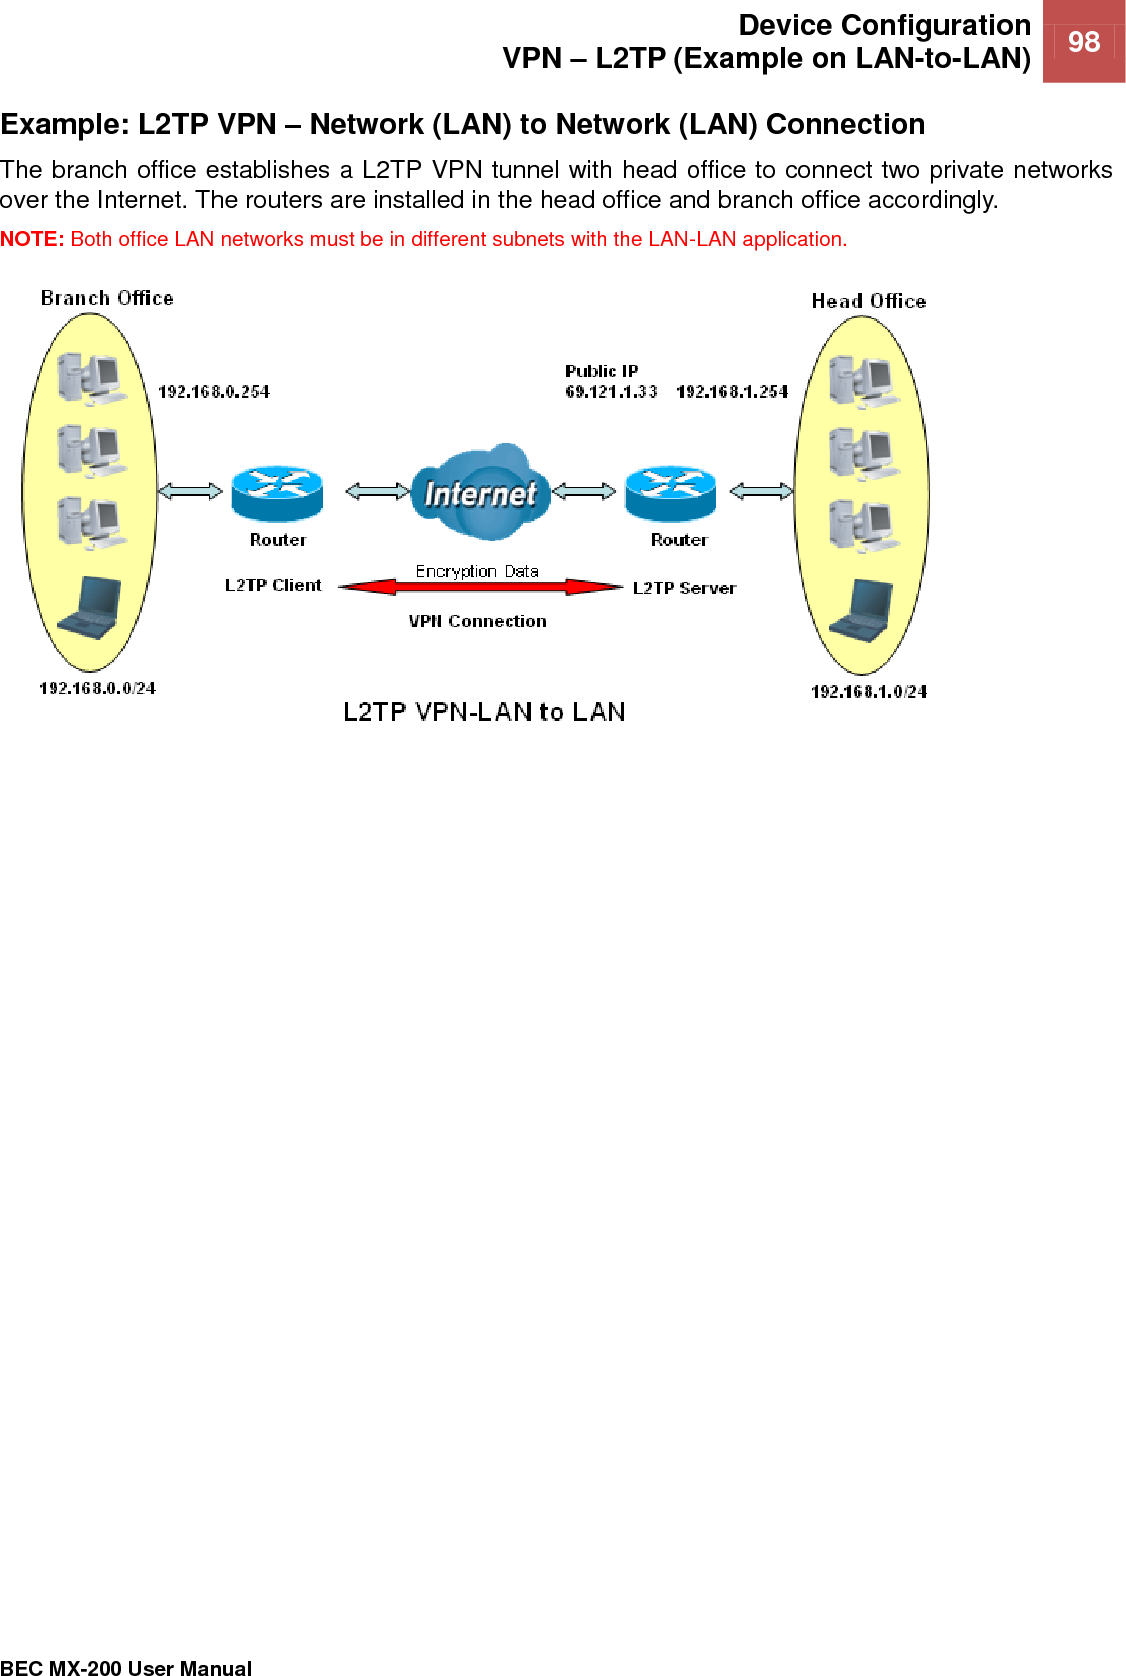  Device Configuration VPN – L2TP (Example on LAN-to-LAN) 98   BEC MX-200 User Manual  Example: L2TP VPN – Network (LAN) to Network (LAN) Connection The branch office establishes a L2TP VPN tunnel with head office to connect two private networks over the Internet. The routers are installed in the head office and branch office accordingly. NOTE: Both office LAN networks must be in different subnets with the LAN-LAN application.       